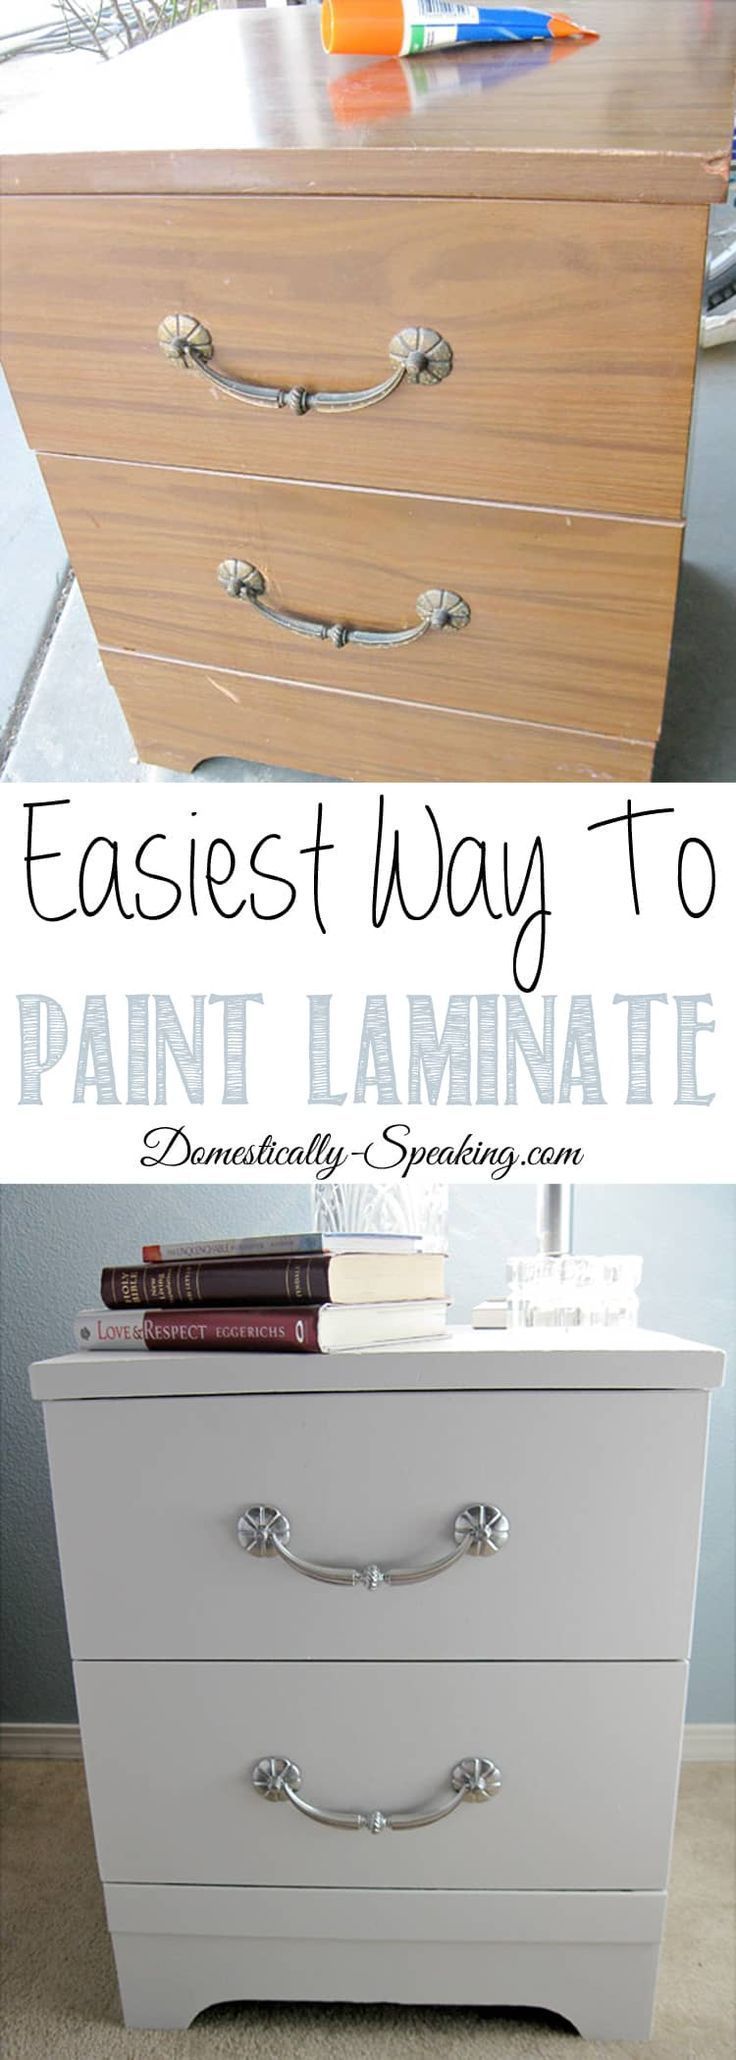 How to Paint Laminate Nightstands -   19 diy Furniture restoration ideas